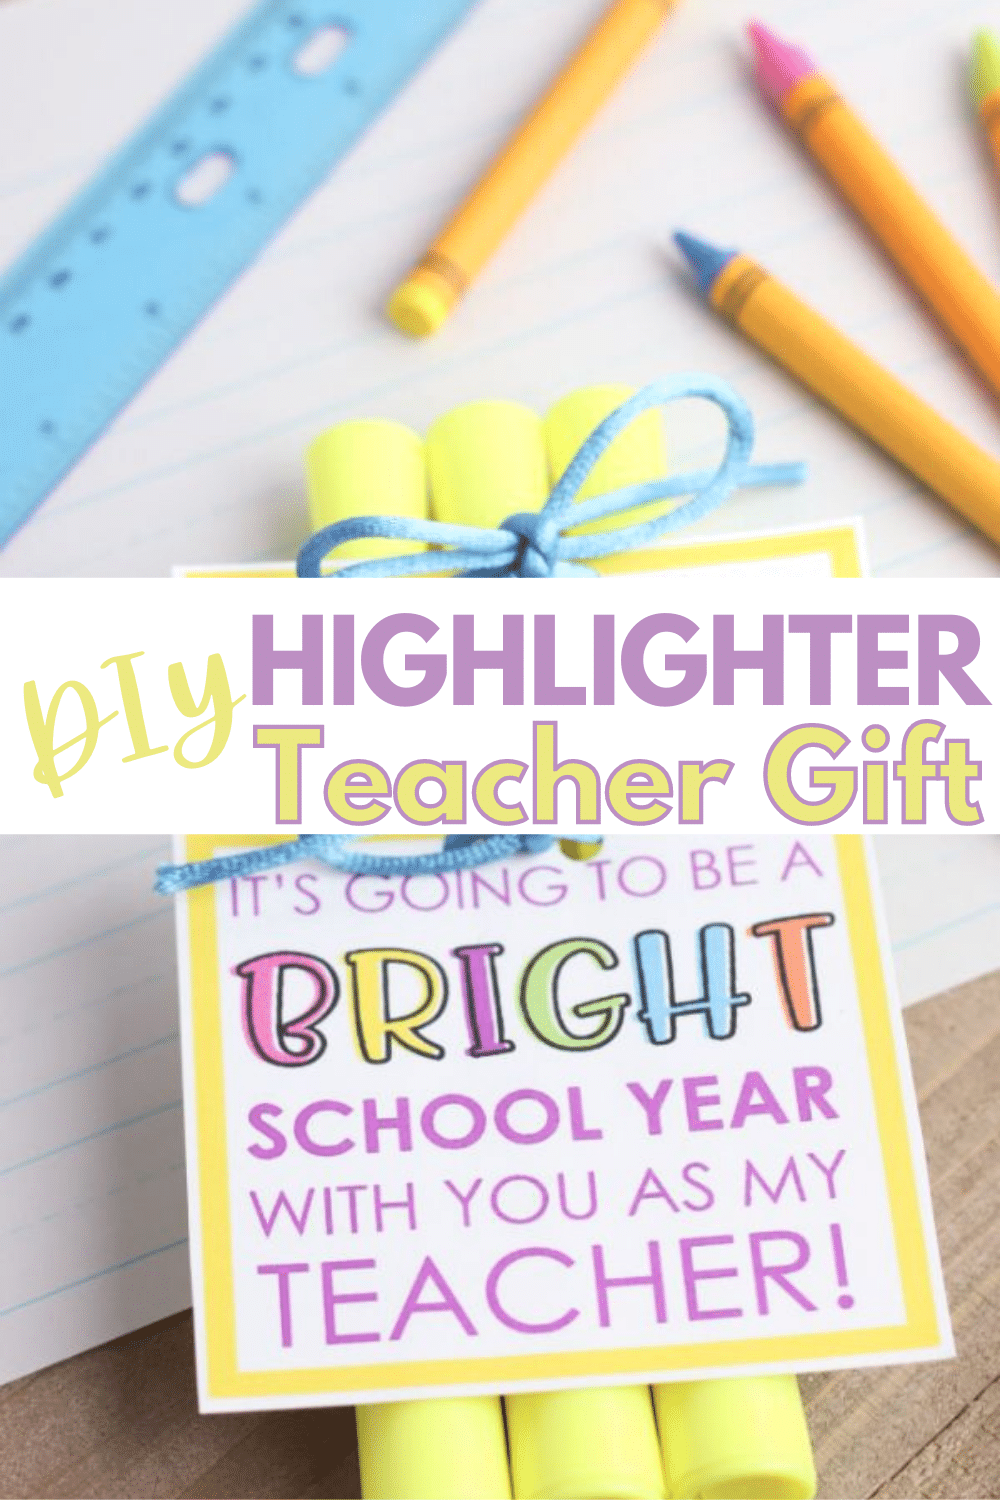 top image is a ruler, crayons and highlighter tied with a blue ribbon, bottom image is a Highlighter Teacher Gift